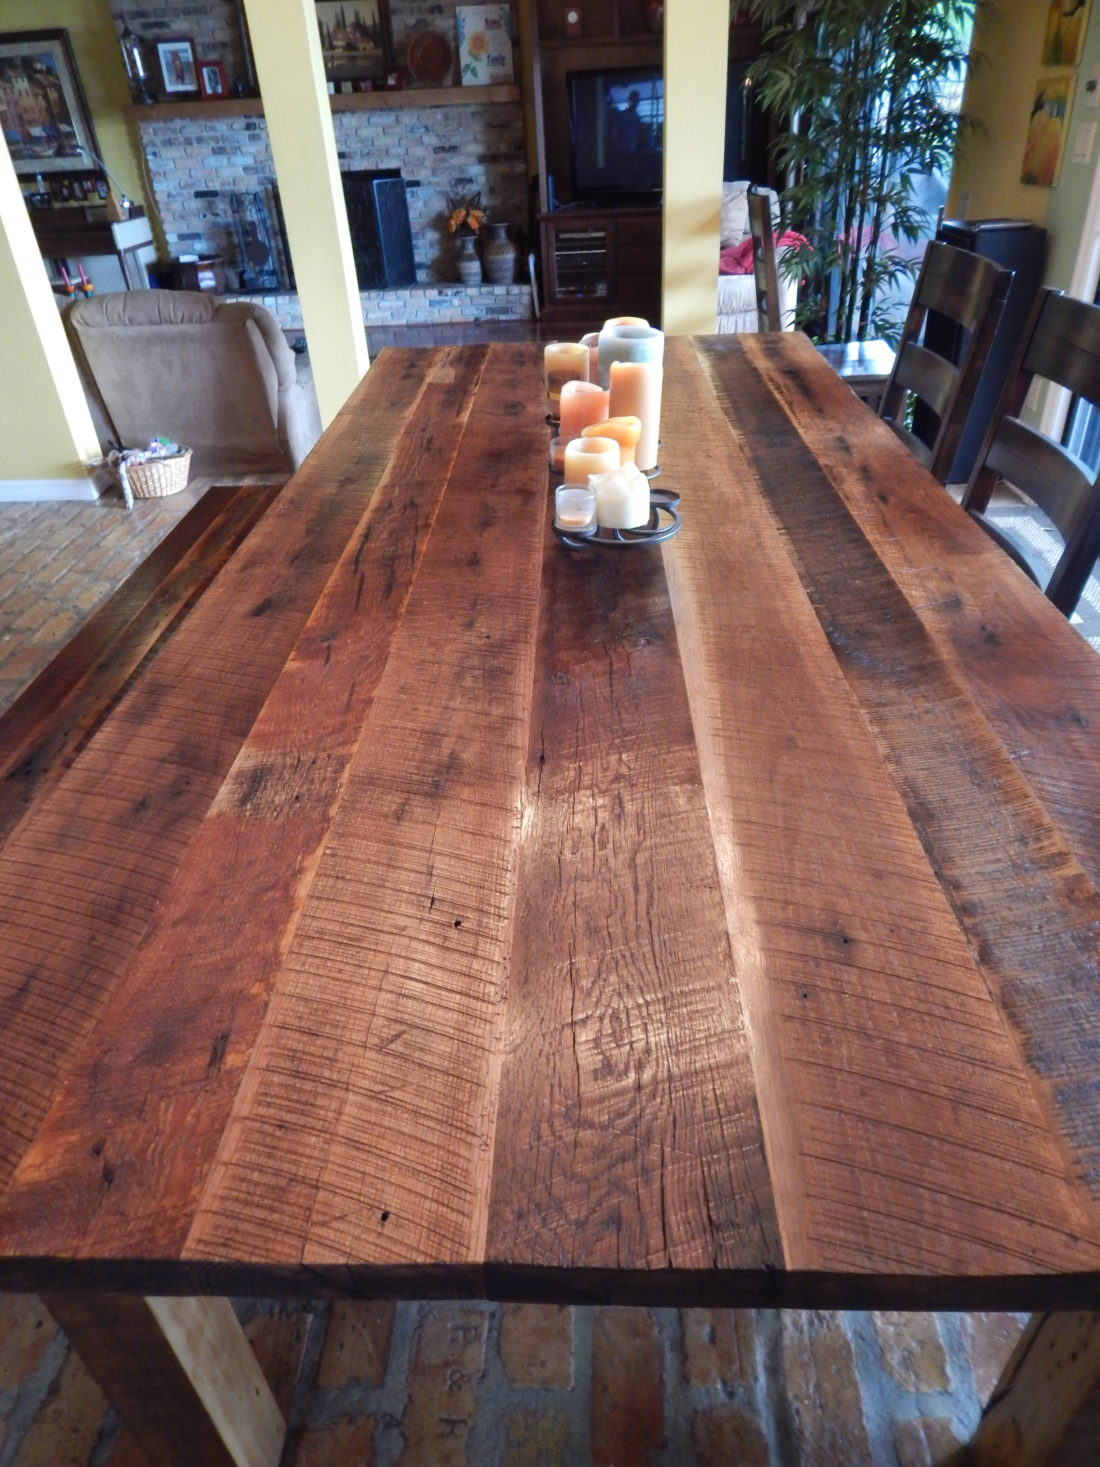 Reclaimed Lumber harvest style dining table orlando